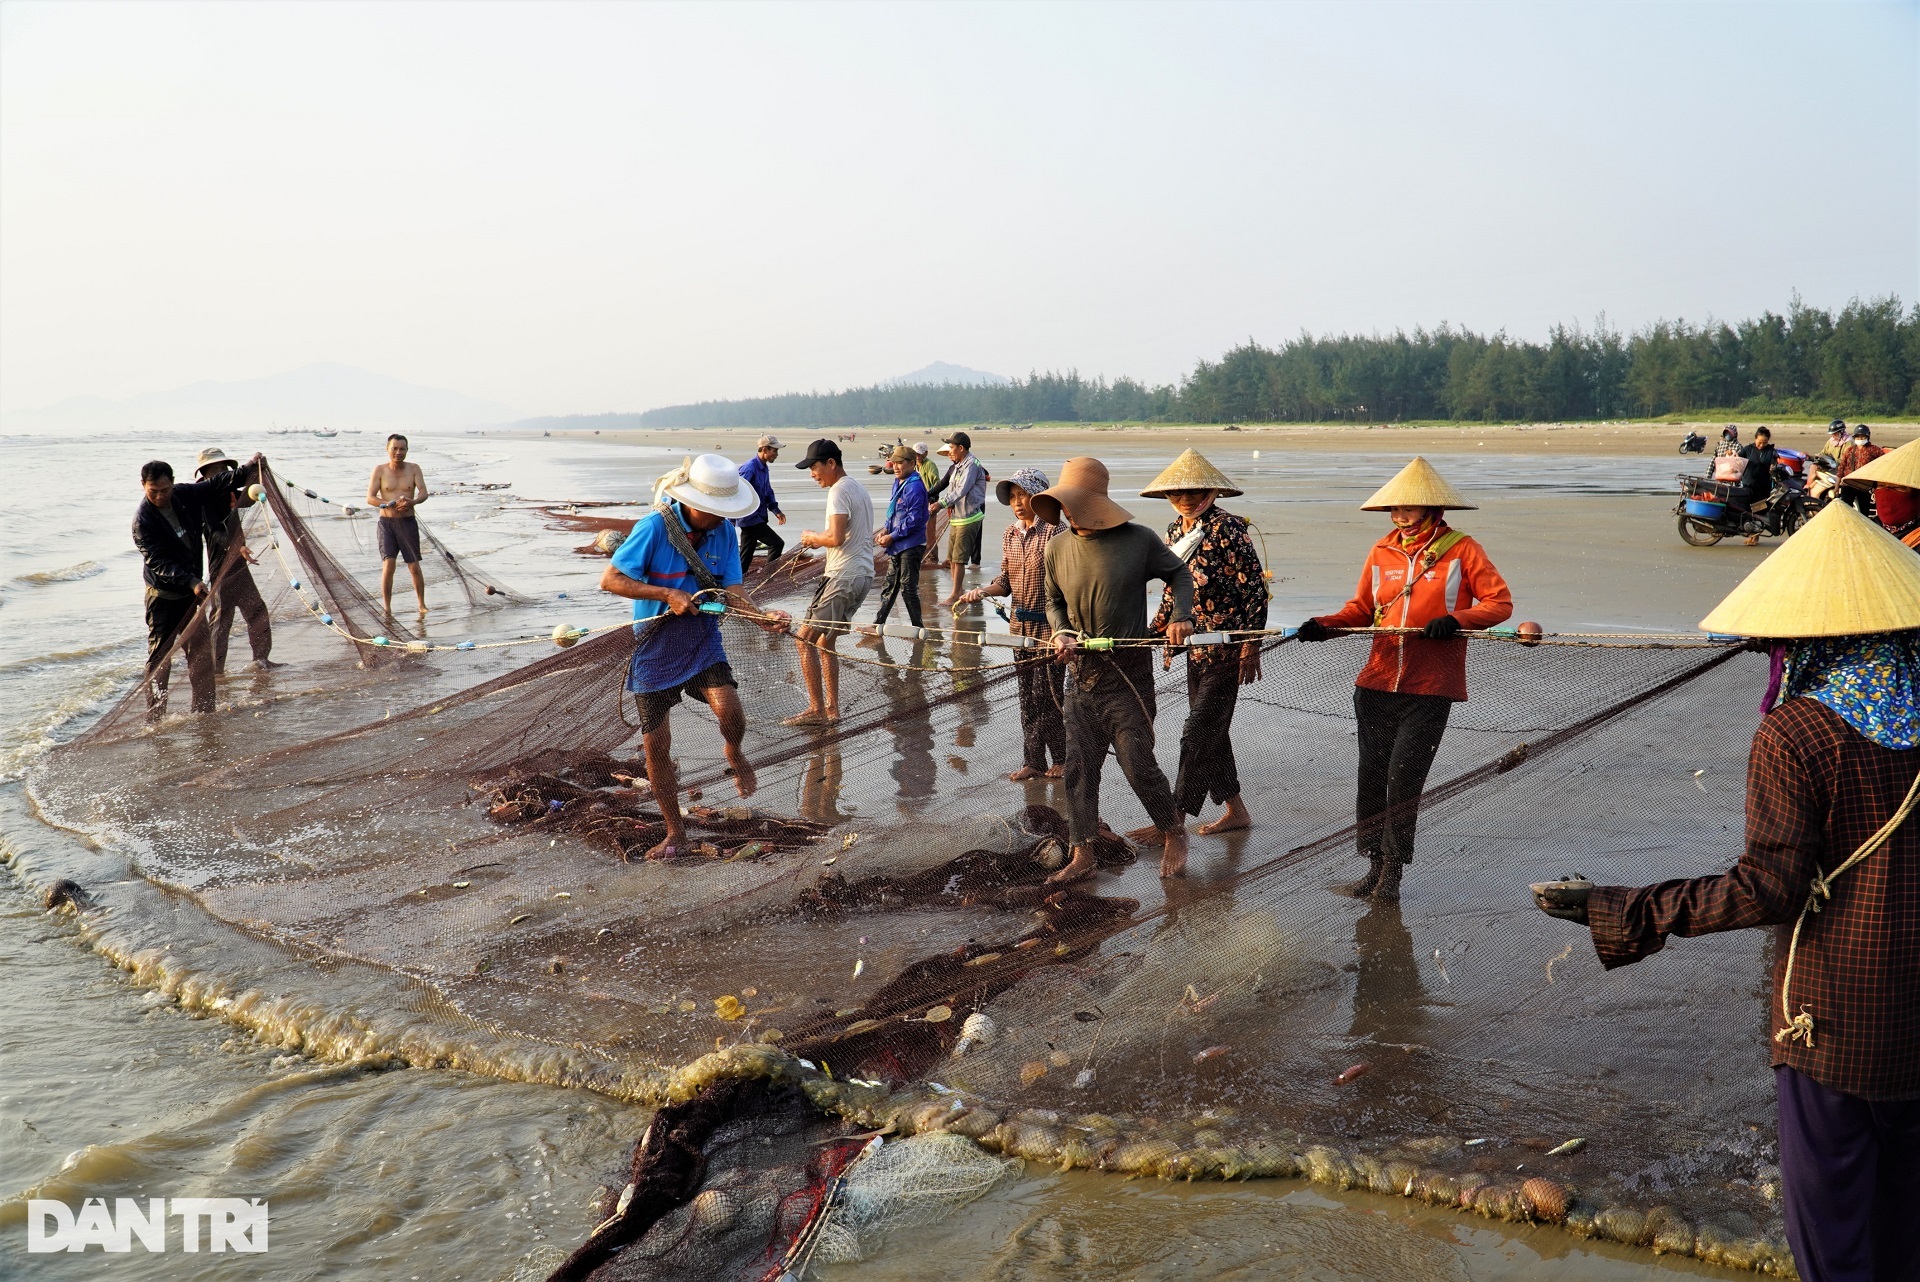 ha tinh province, loc ha district, the group of people “exercising” on the beach also brought back dozens of kilograms of fresh squid